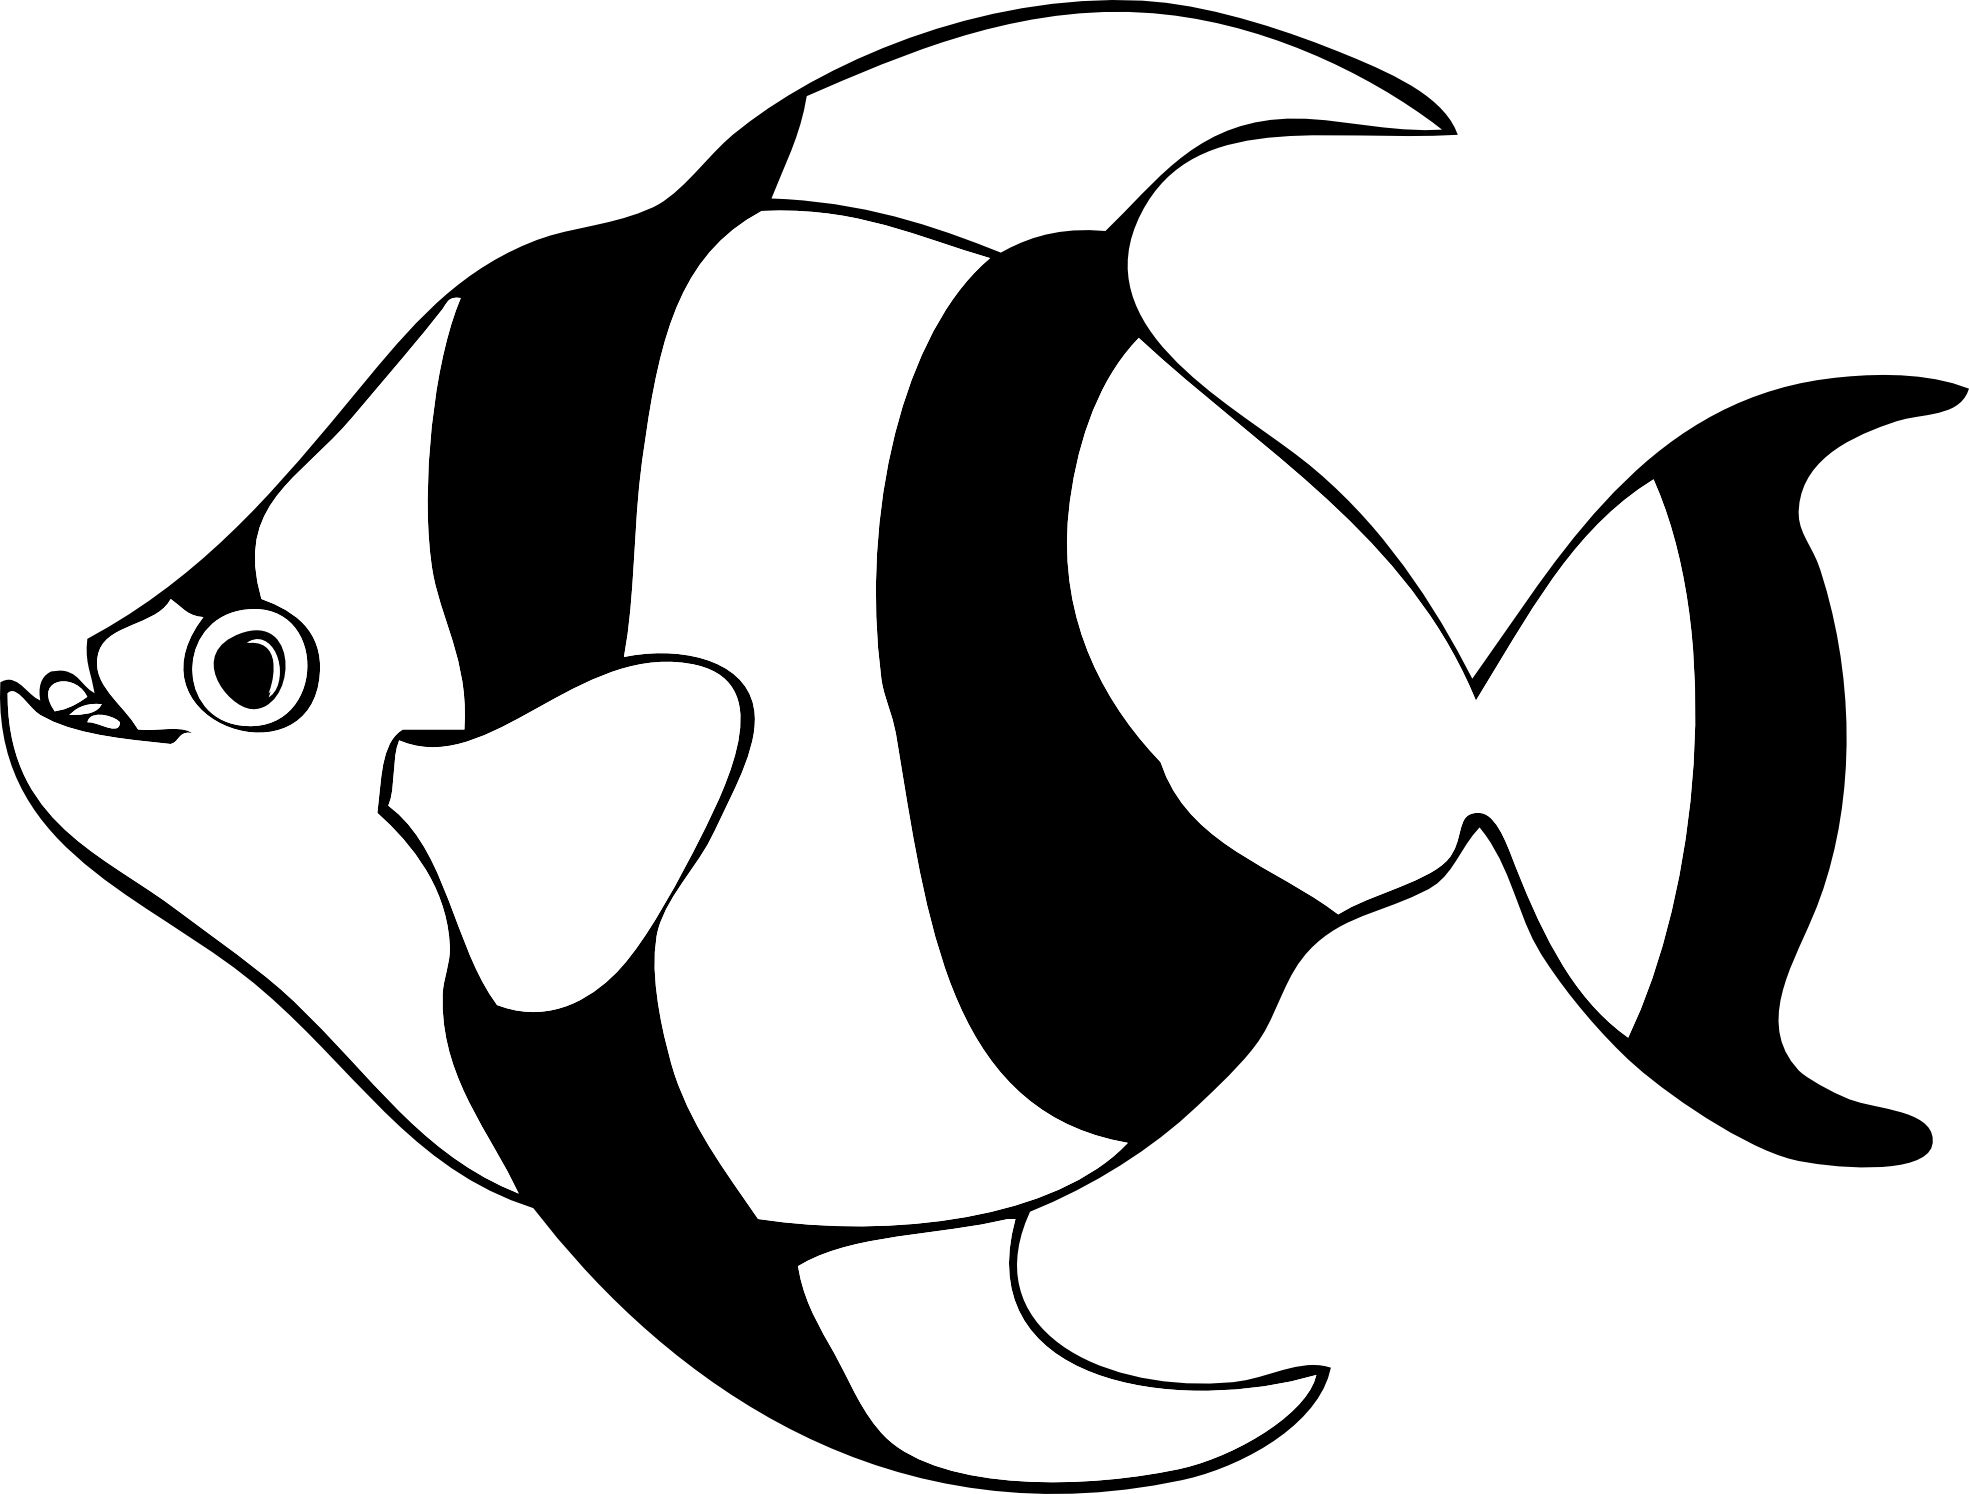 Black And White Fish Drawings - ClipArt Best